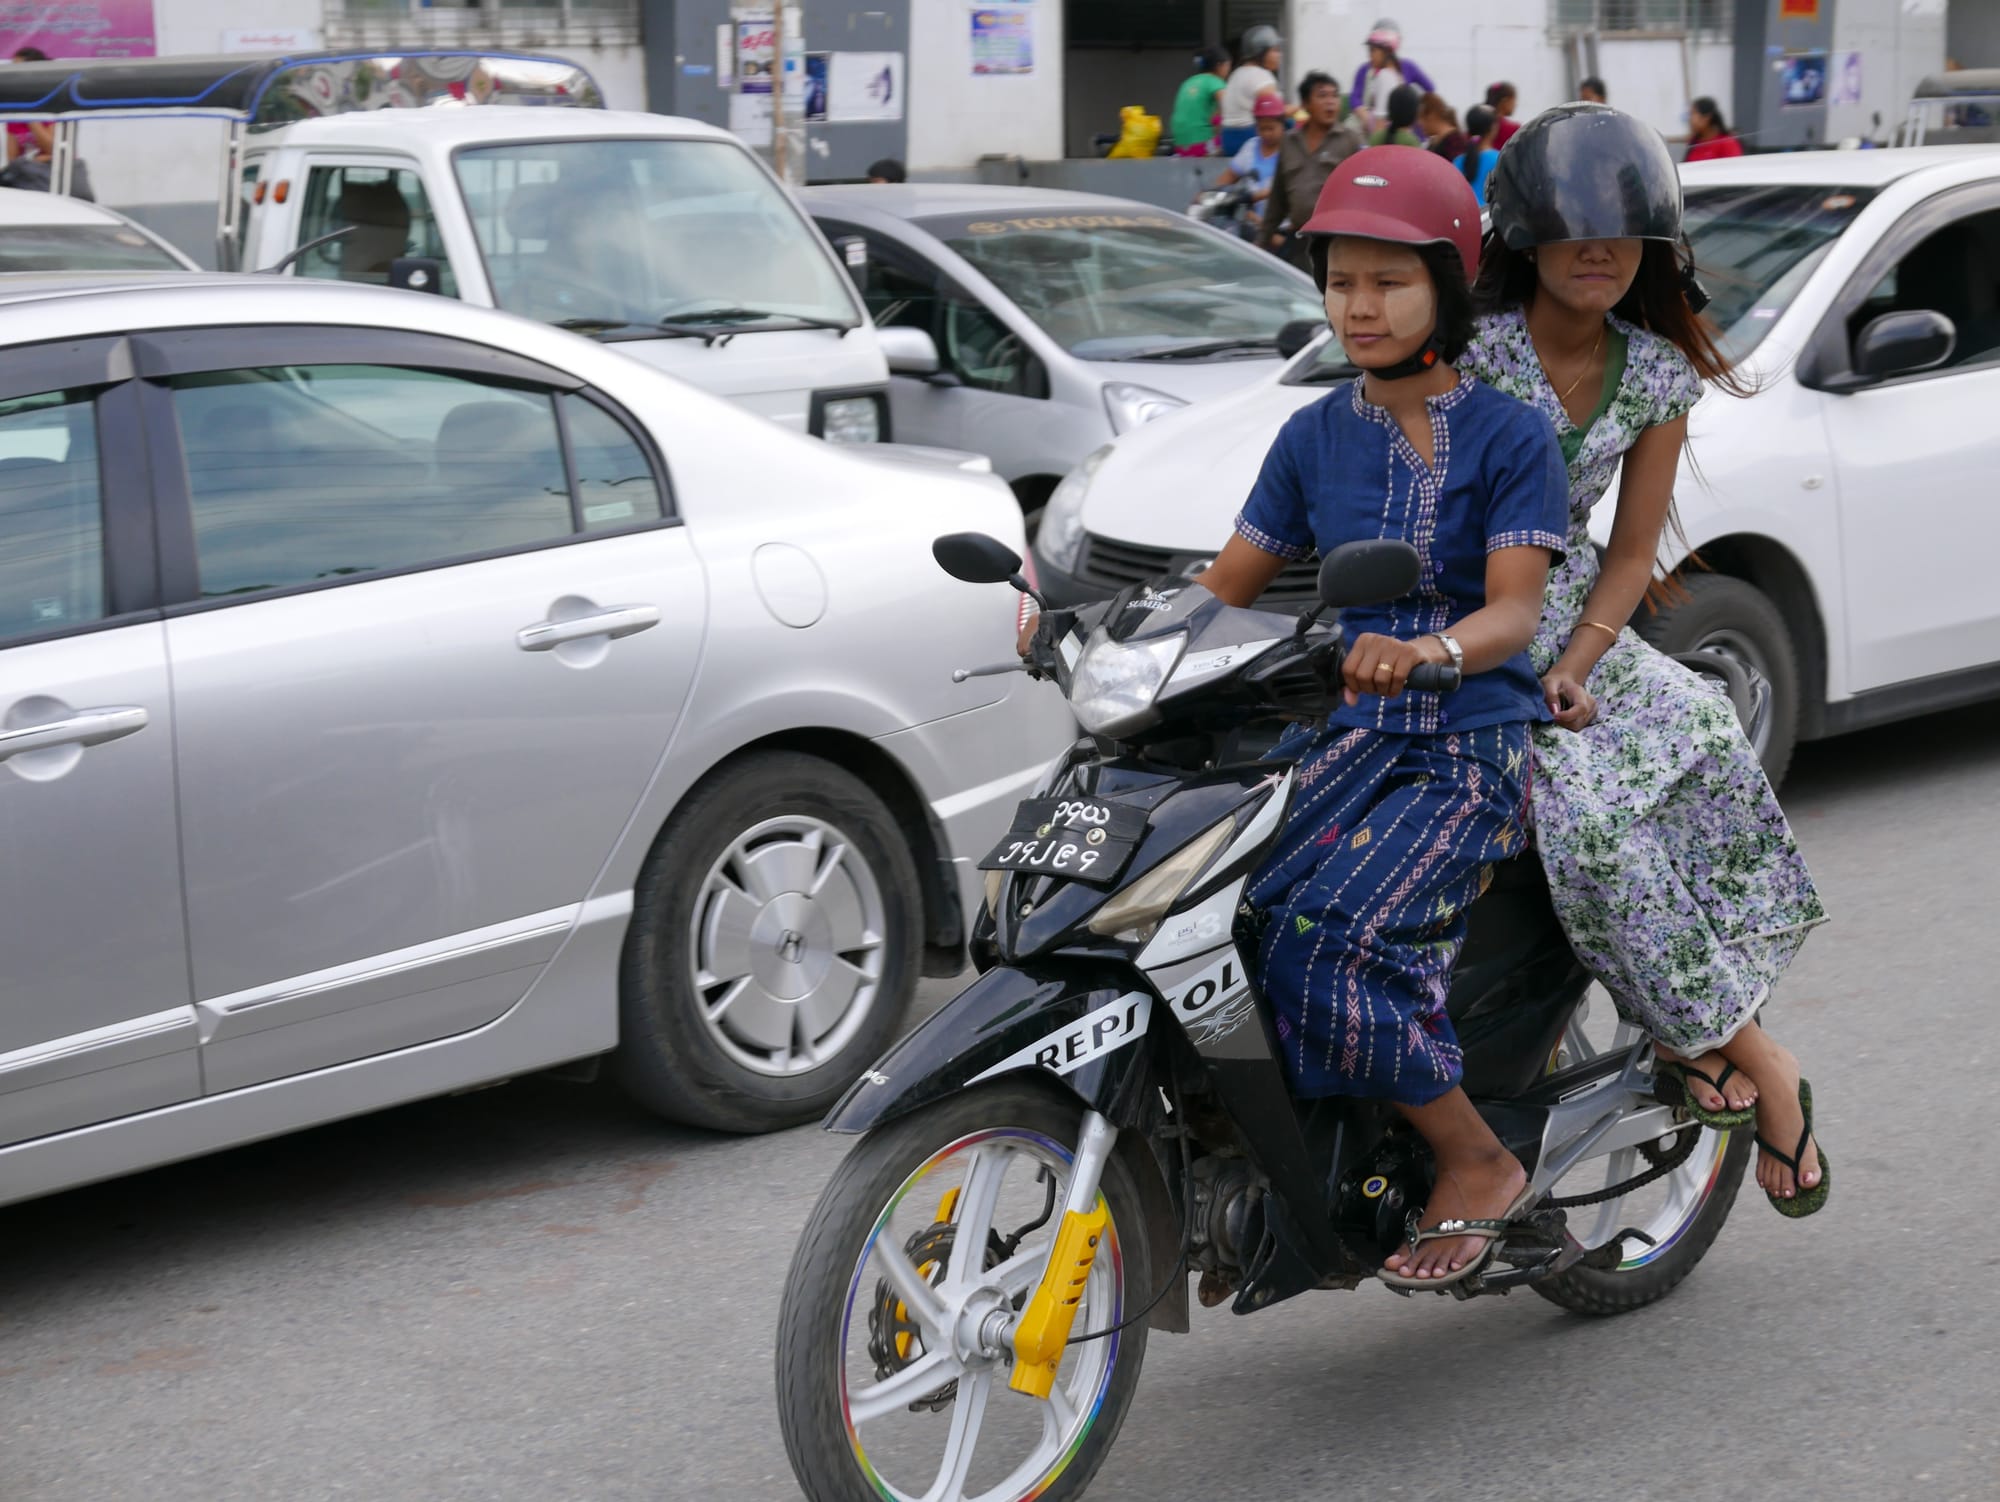 Photo by Author — heading out for the evening — motorbikes of Mandalay